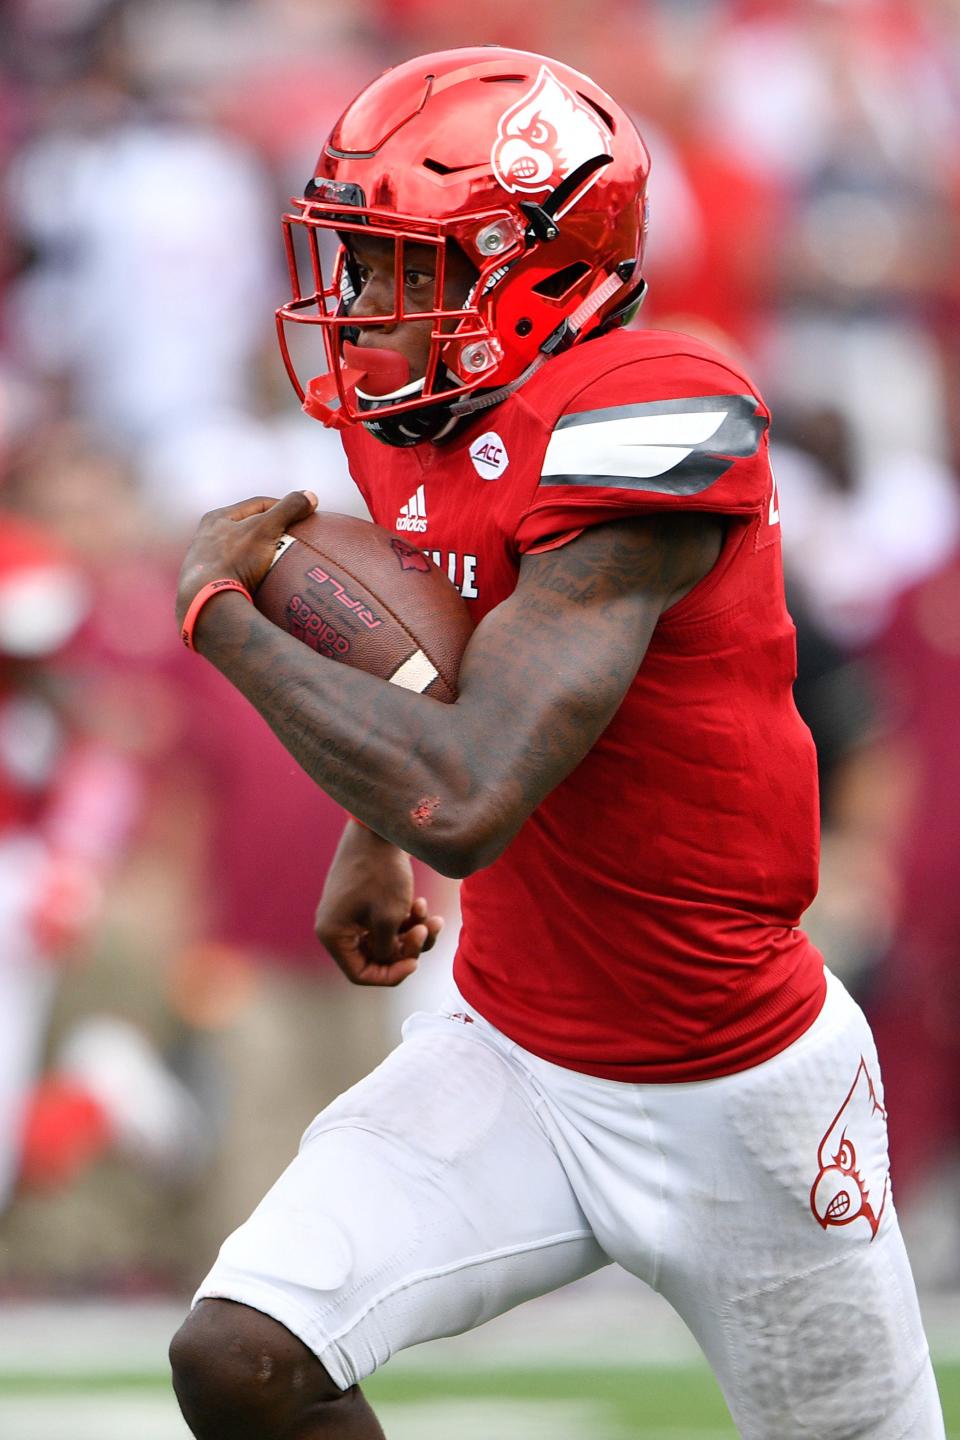 Lamar Jackson of Louisville was the most recent of six Heisman Trophy winners to play in the Gator Bowl.